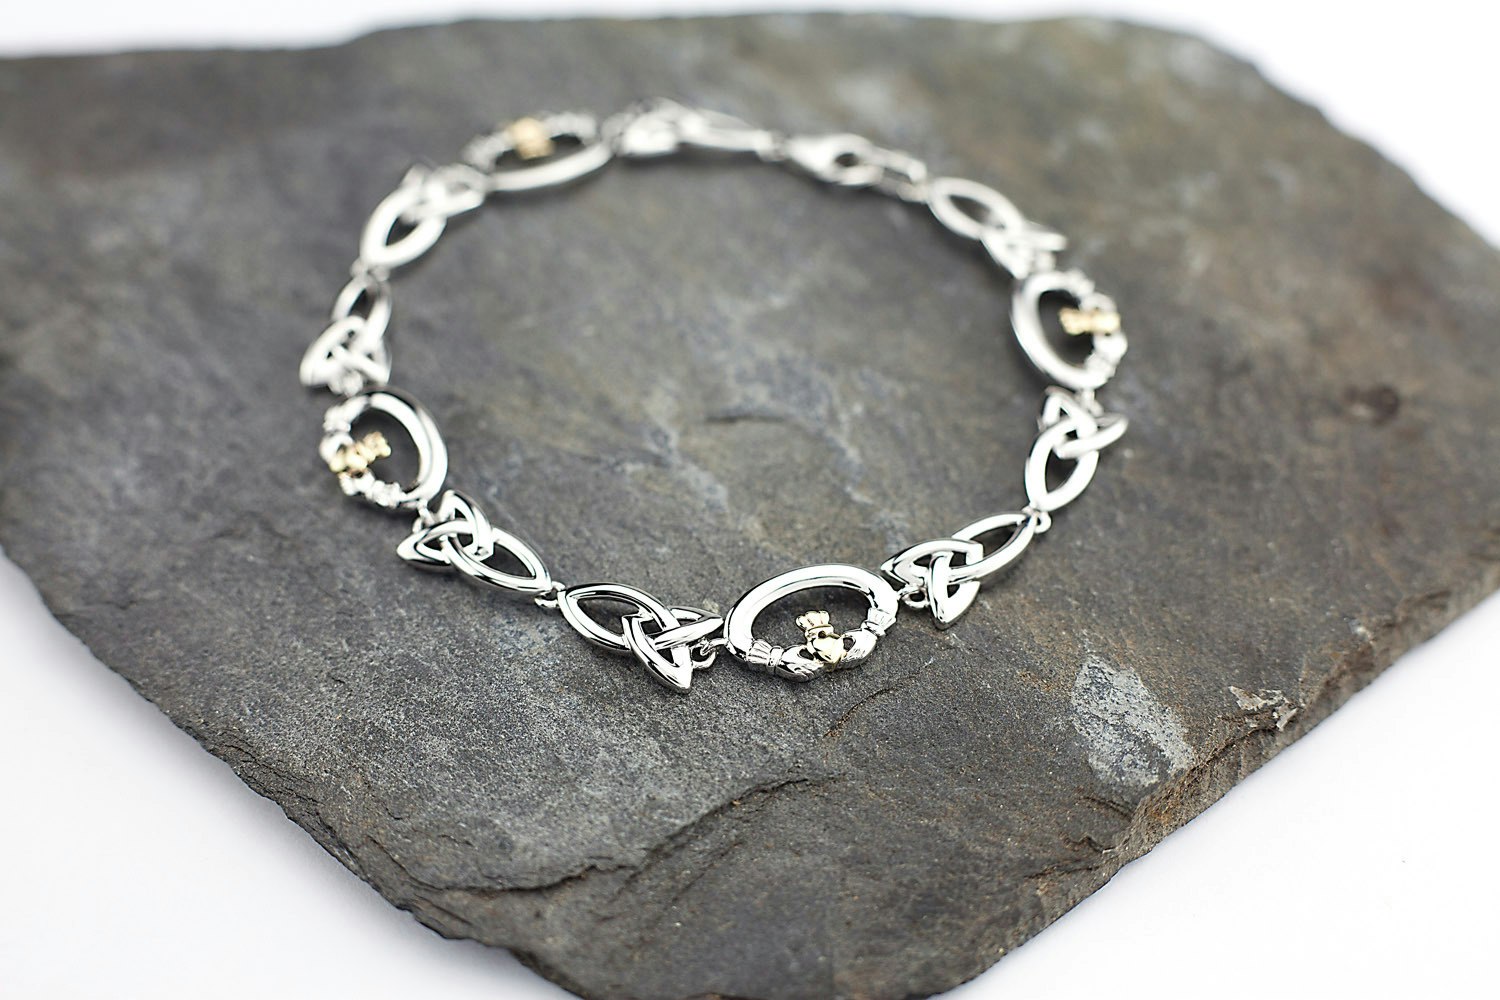 Silver and Hand-knitted ๑ 999 Silver Bracelet for Men ๑ Oxidized Silver  Bracelet ๑ Celtic Bracelet ๑ Woven Bracelet - Etsy | Oxidized silver  bracelet, Celtic bracelet, Silver knot bracelet